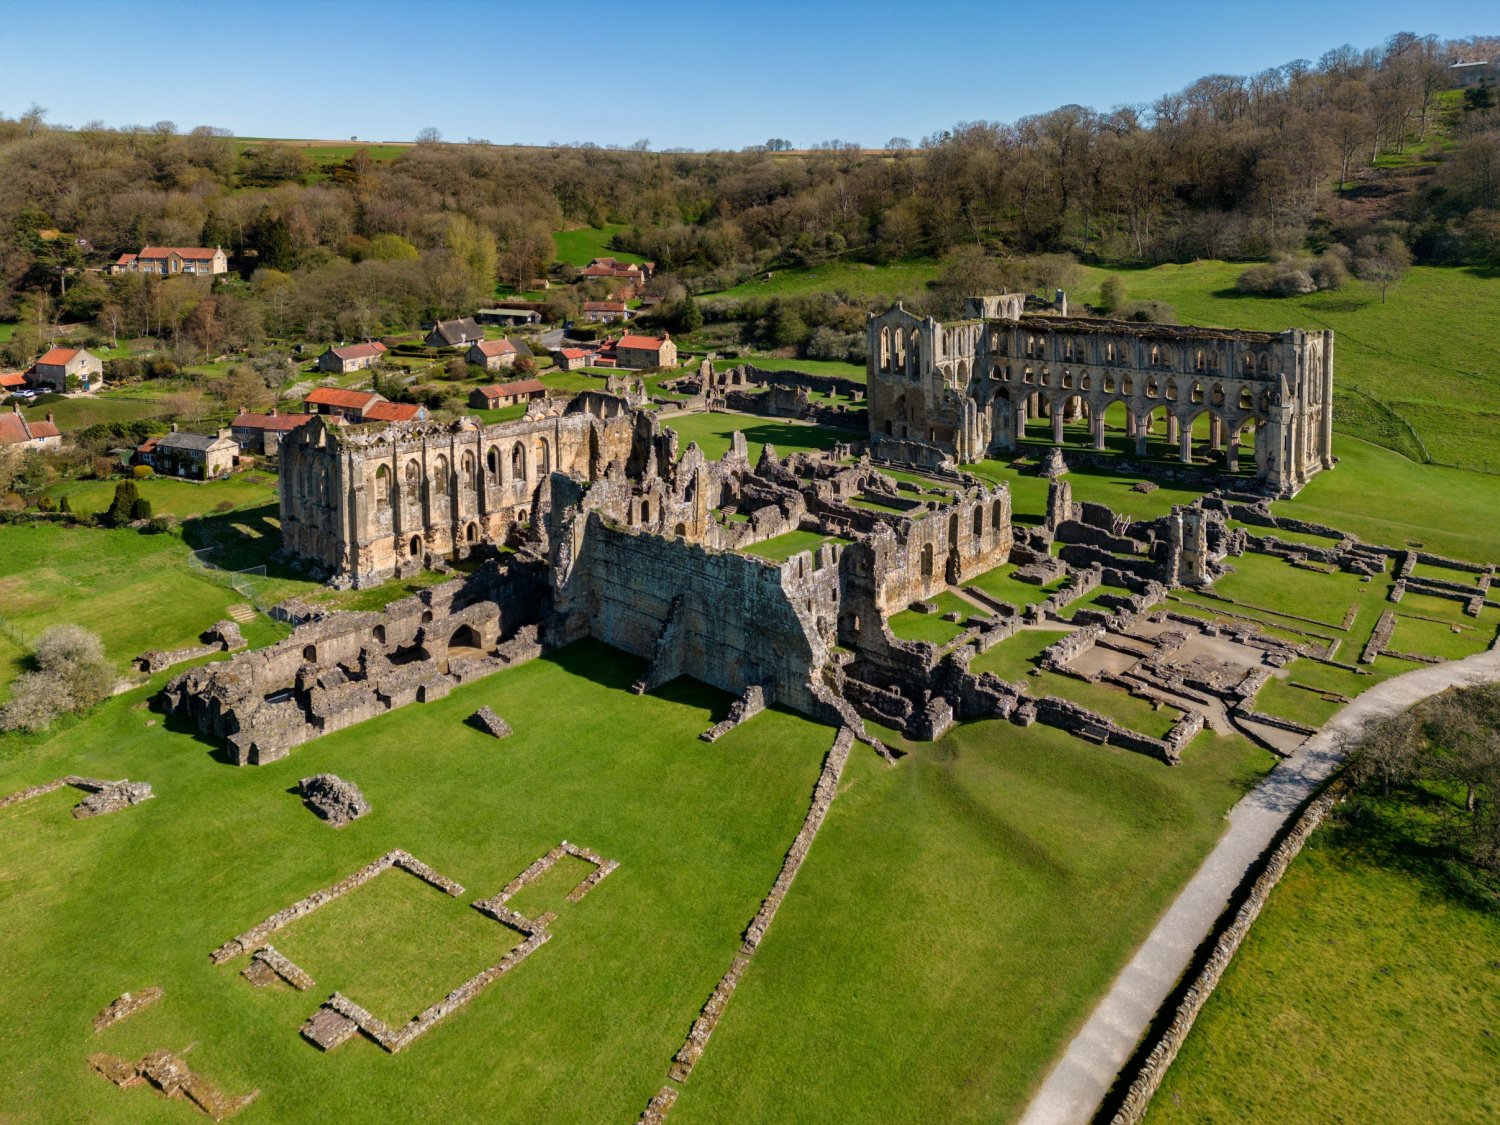 Image name rievaulx abbey yorkshire the 16 image from the post Walk: Rievaulx Abbey, Cold Kirby and Old Byland in Yorkshire.com.